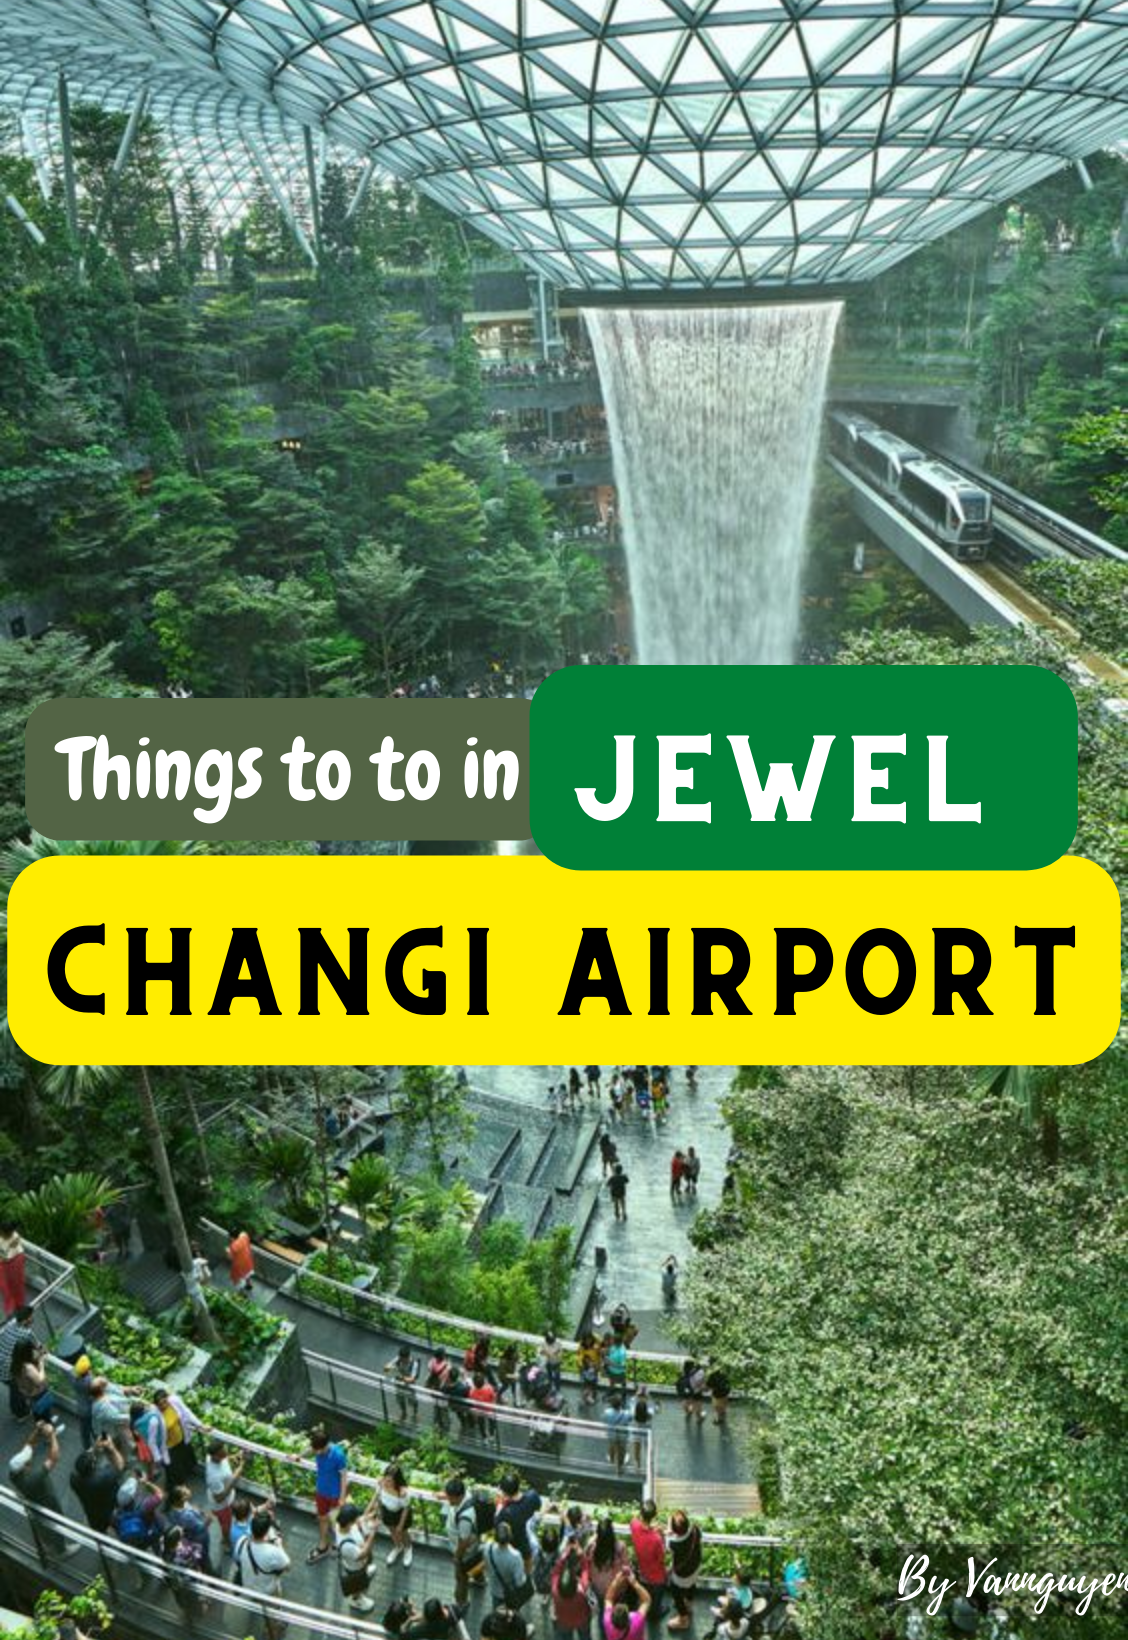 Things to Do in Jewel Changi Airport, Singapore